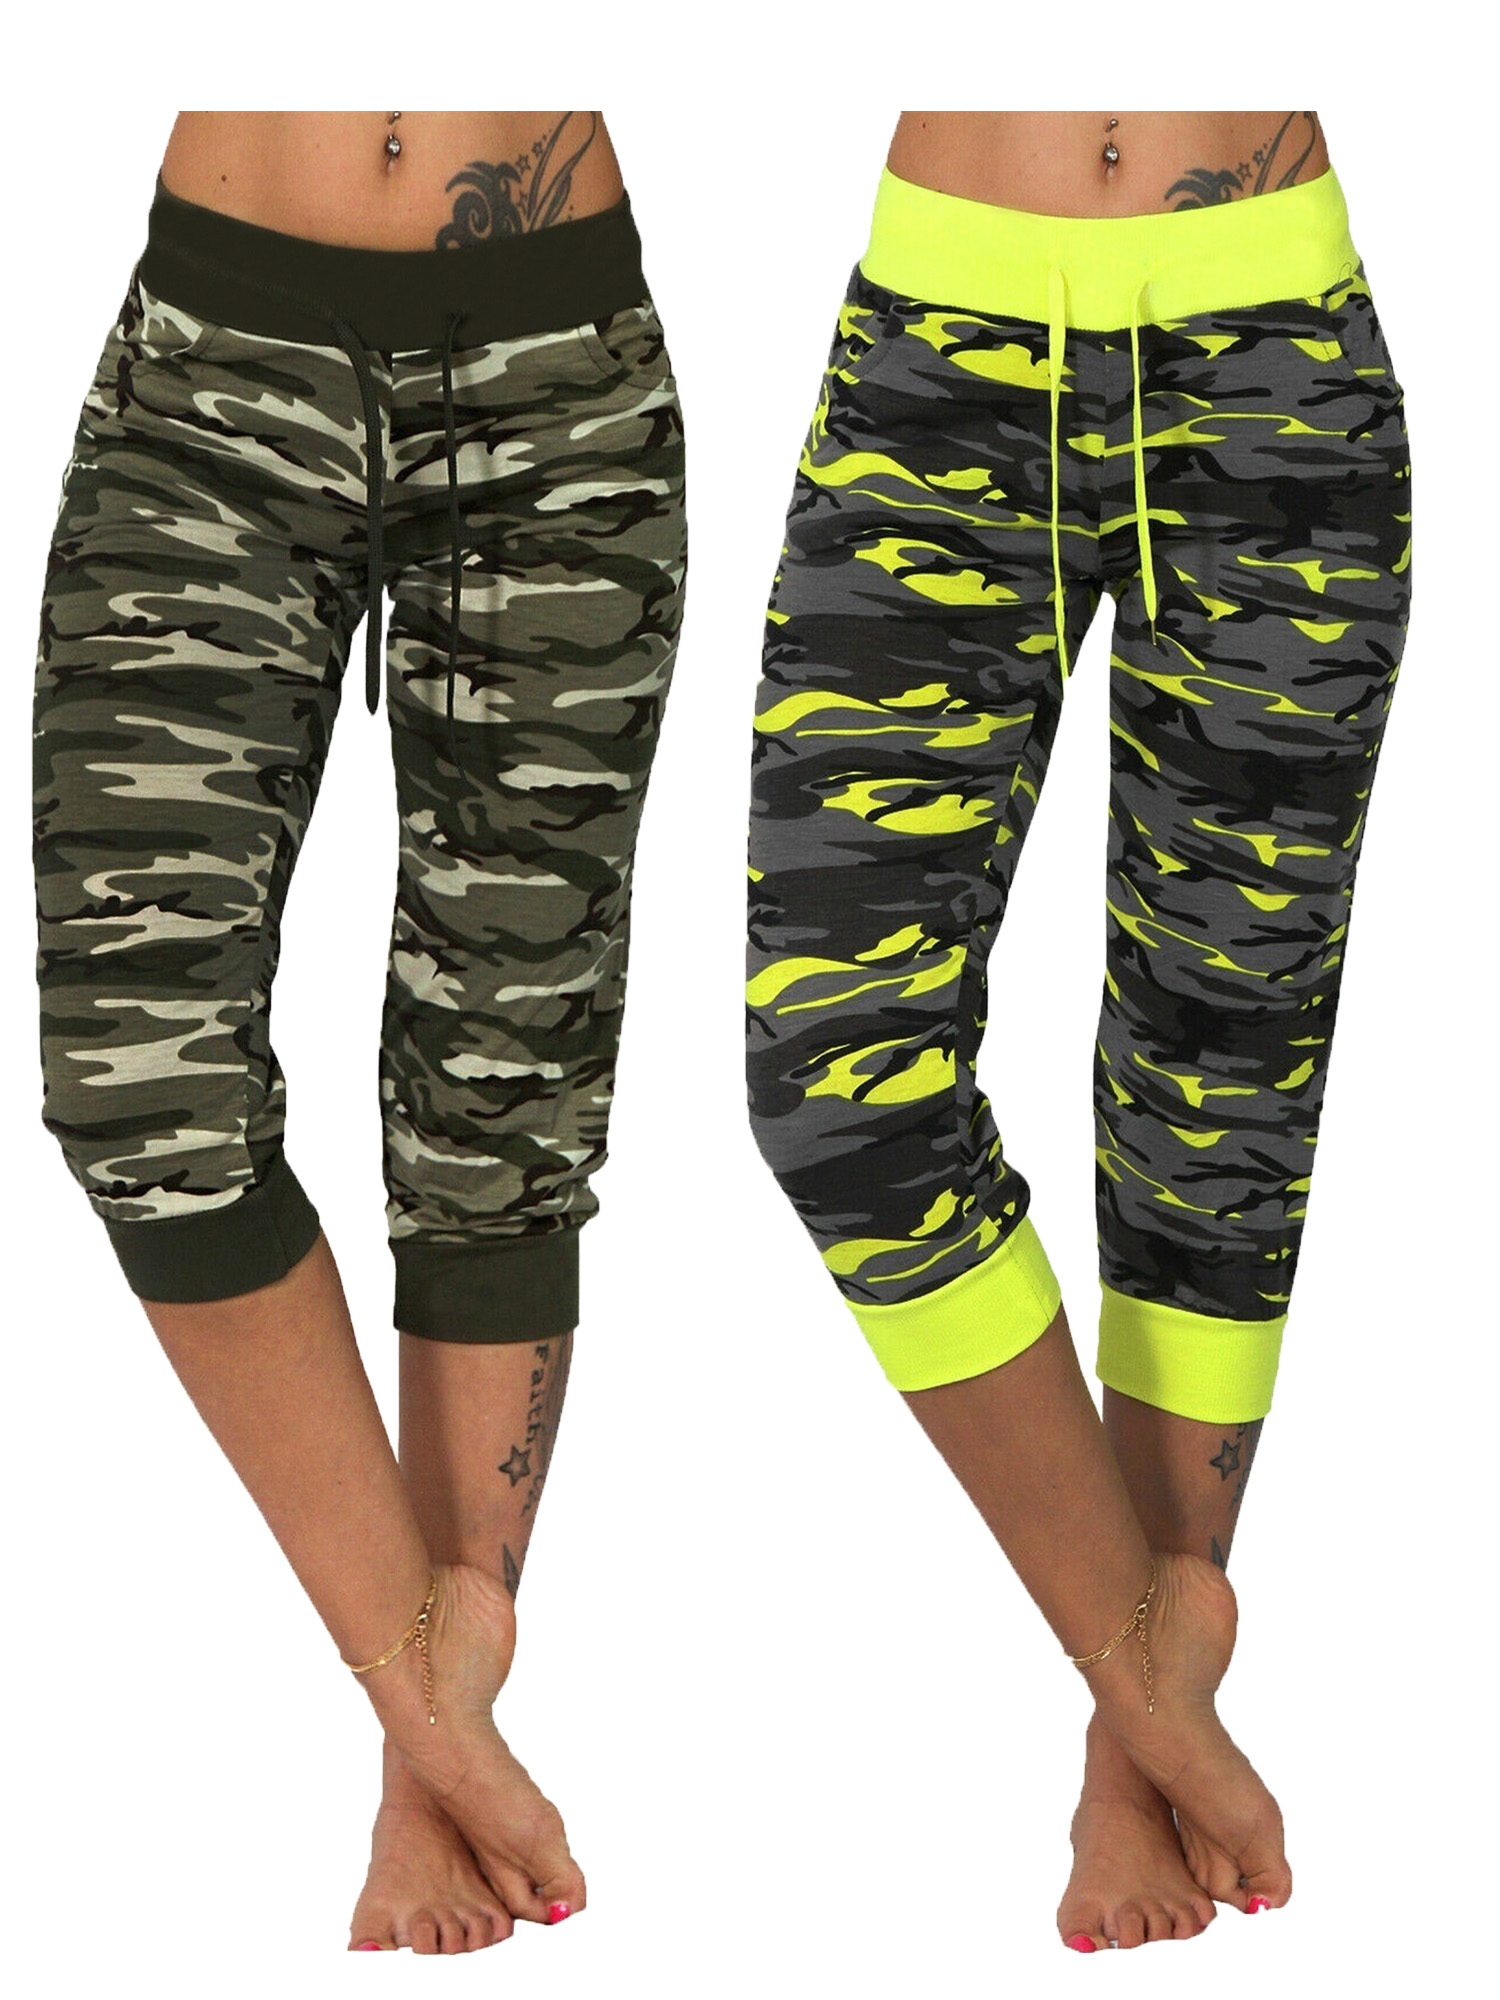 (2 Packs) Juniors' Plus Size Camo Sports Yoga Crop Jeggings High Waist Tummy Control Oversized Camouflage Pants - image 1 of 5